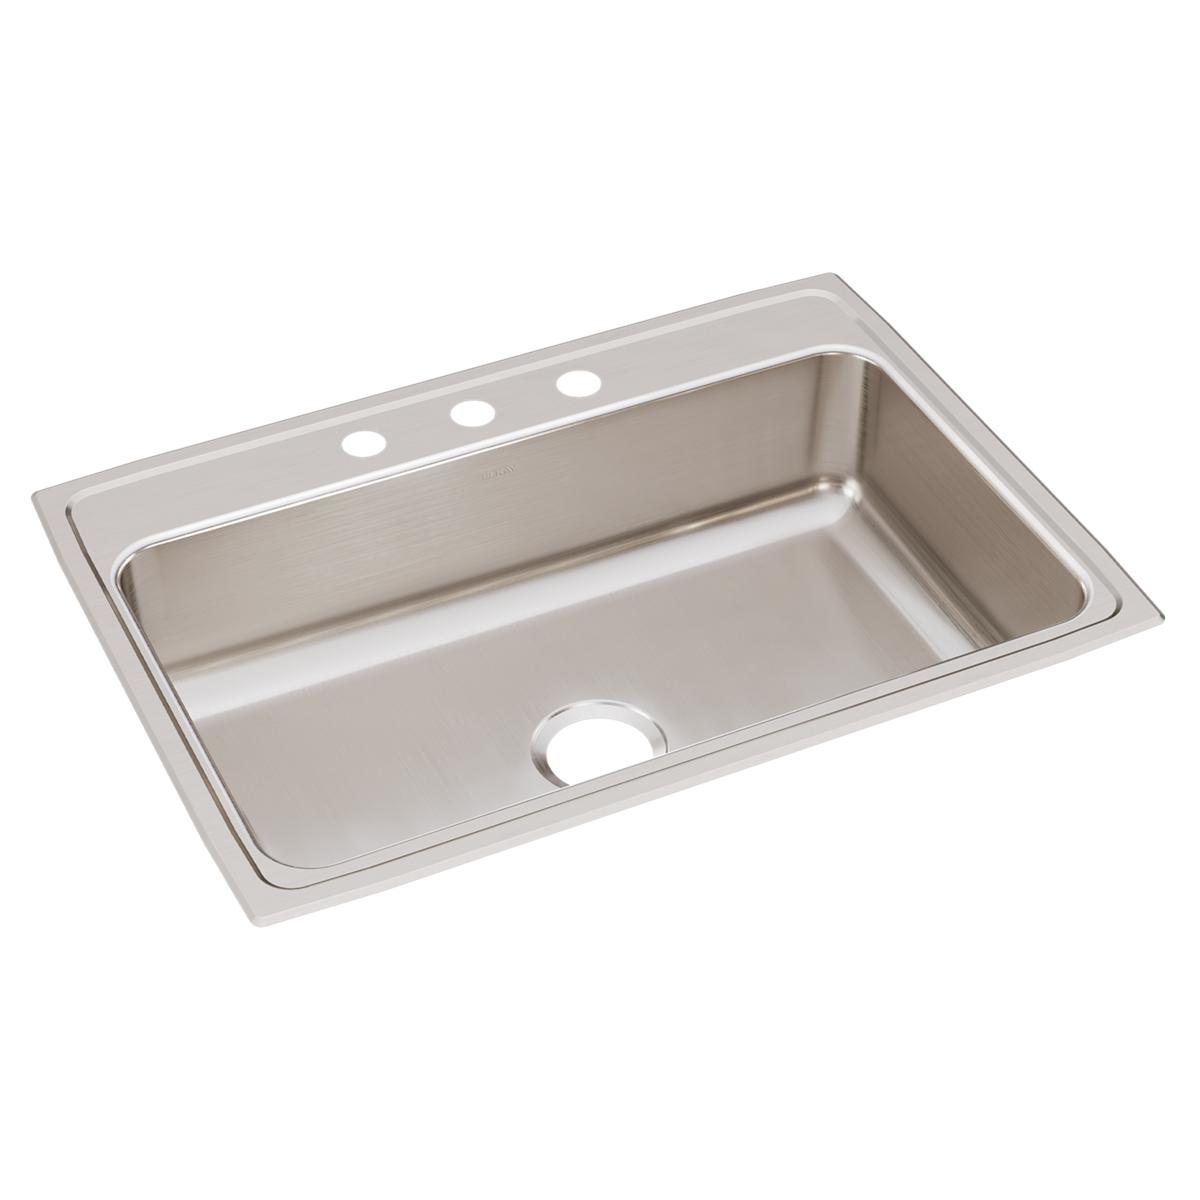 Elkay Lustertone Classic 31" x 22" x 7-5/8" Single Bowl Drop-in Sink with Quick-clip